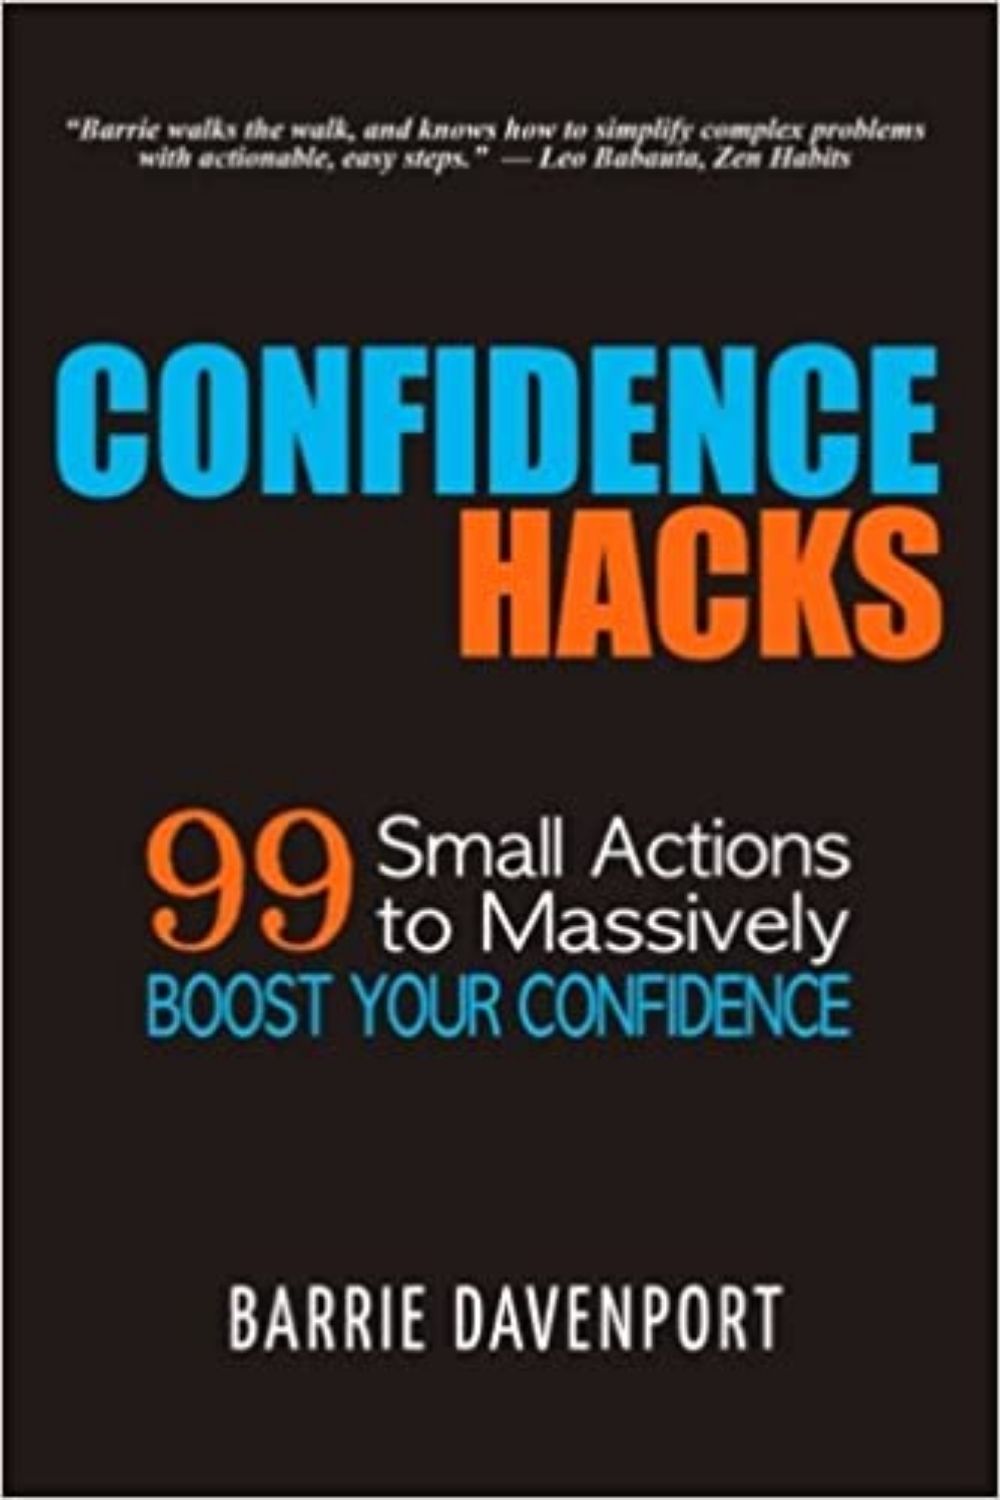 Confidence Hacks by Barrie Davenport